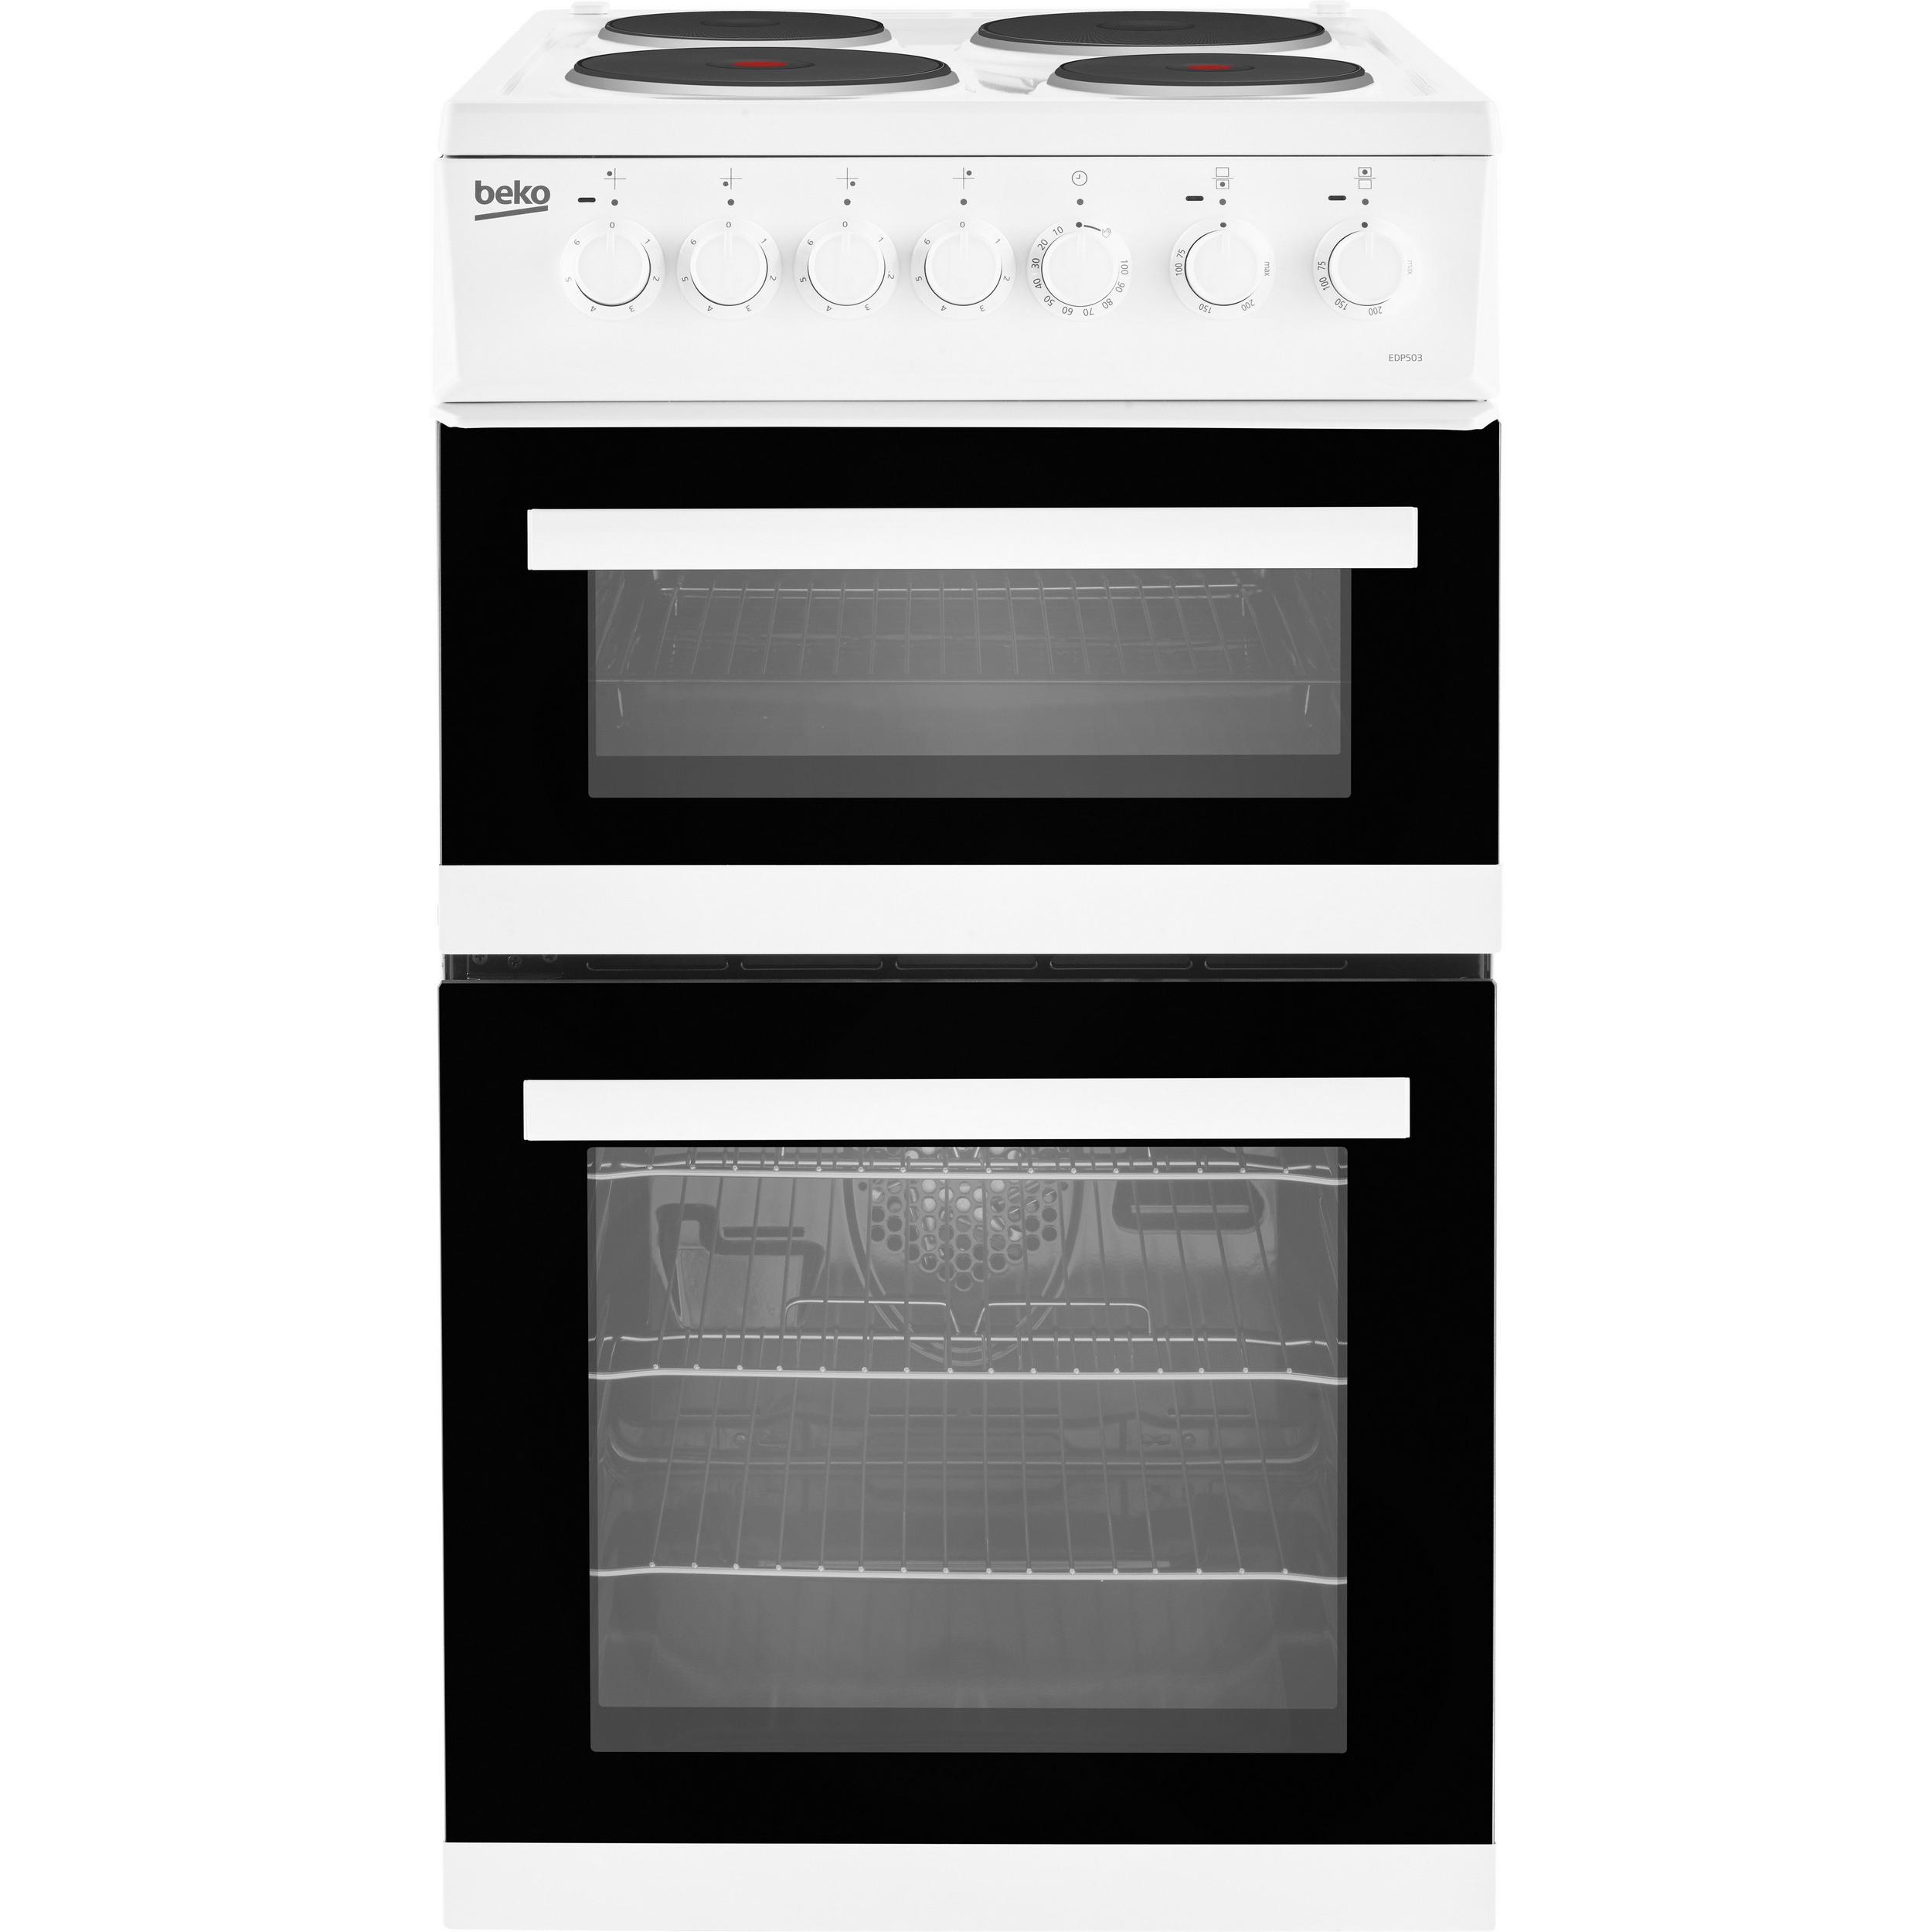 Image of Beko EDP503W 50cm Double Oven Electric Cooker in White Solid Plate